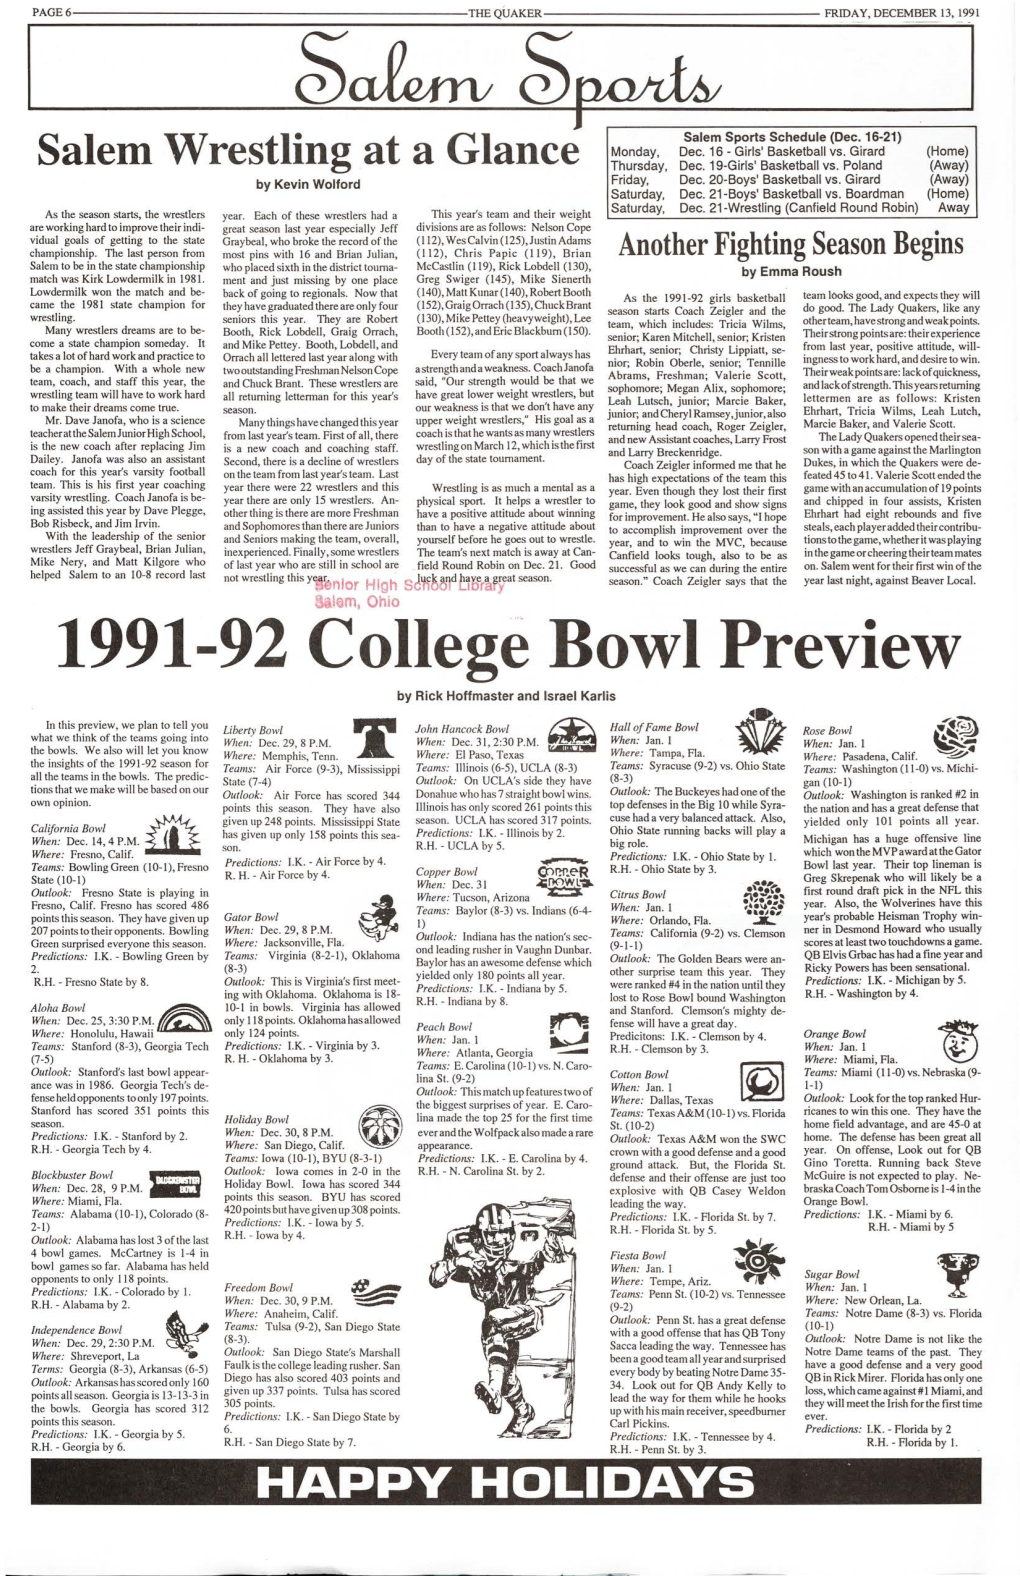 1991-92 College Bowl Preview by Rick Hoffmaster and Israel Karlis